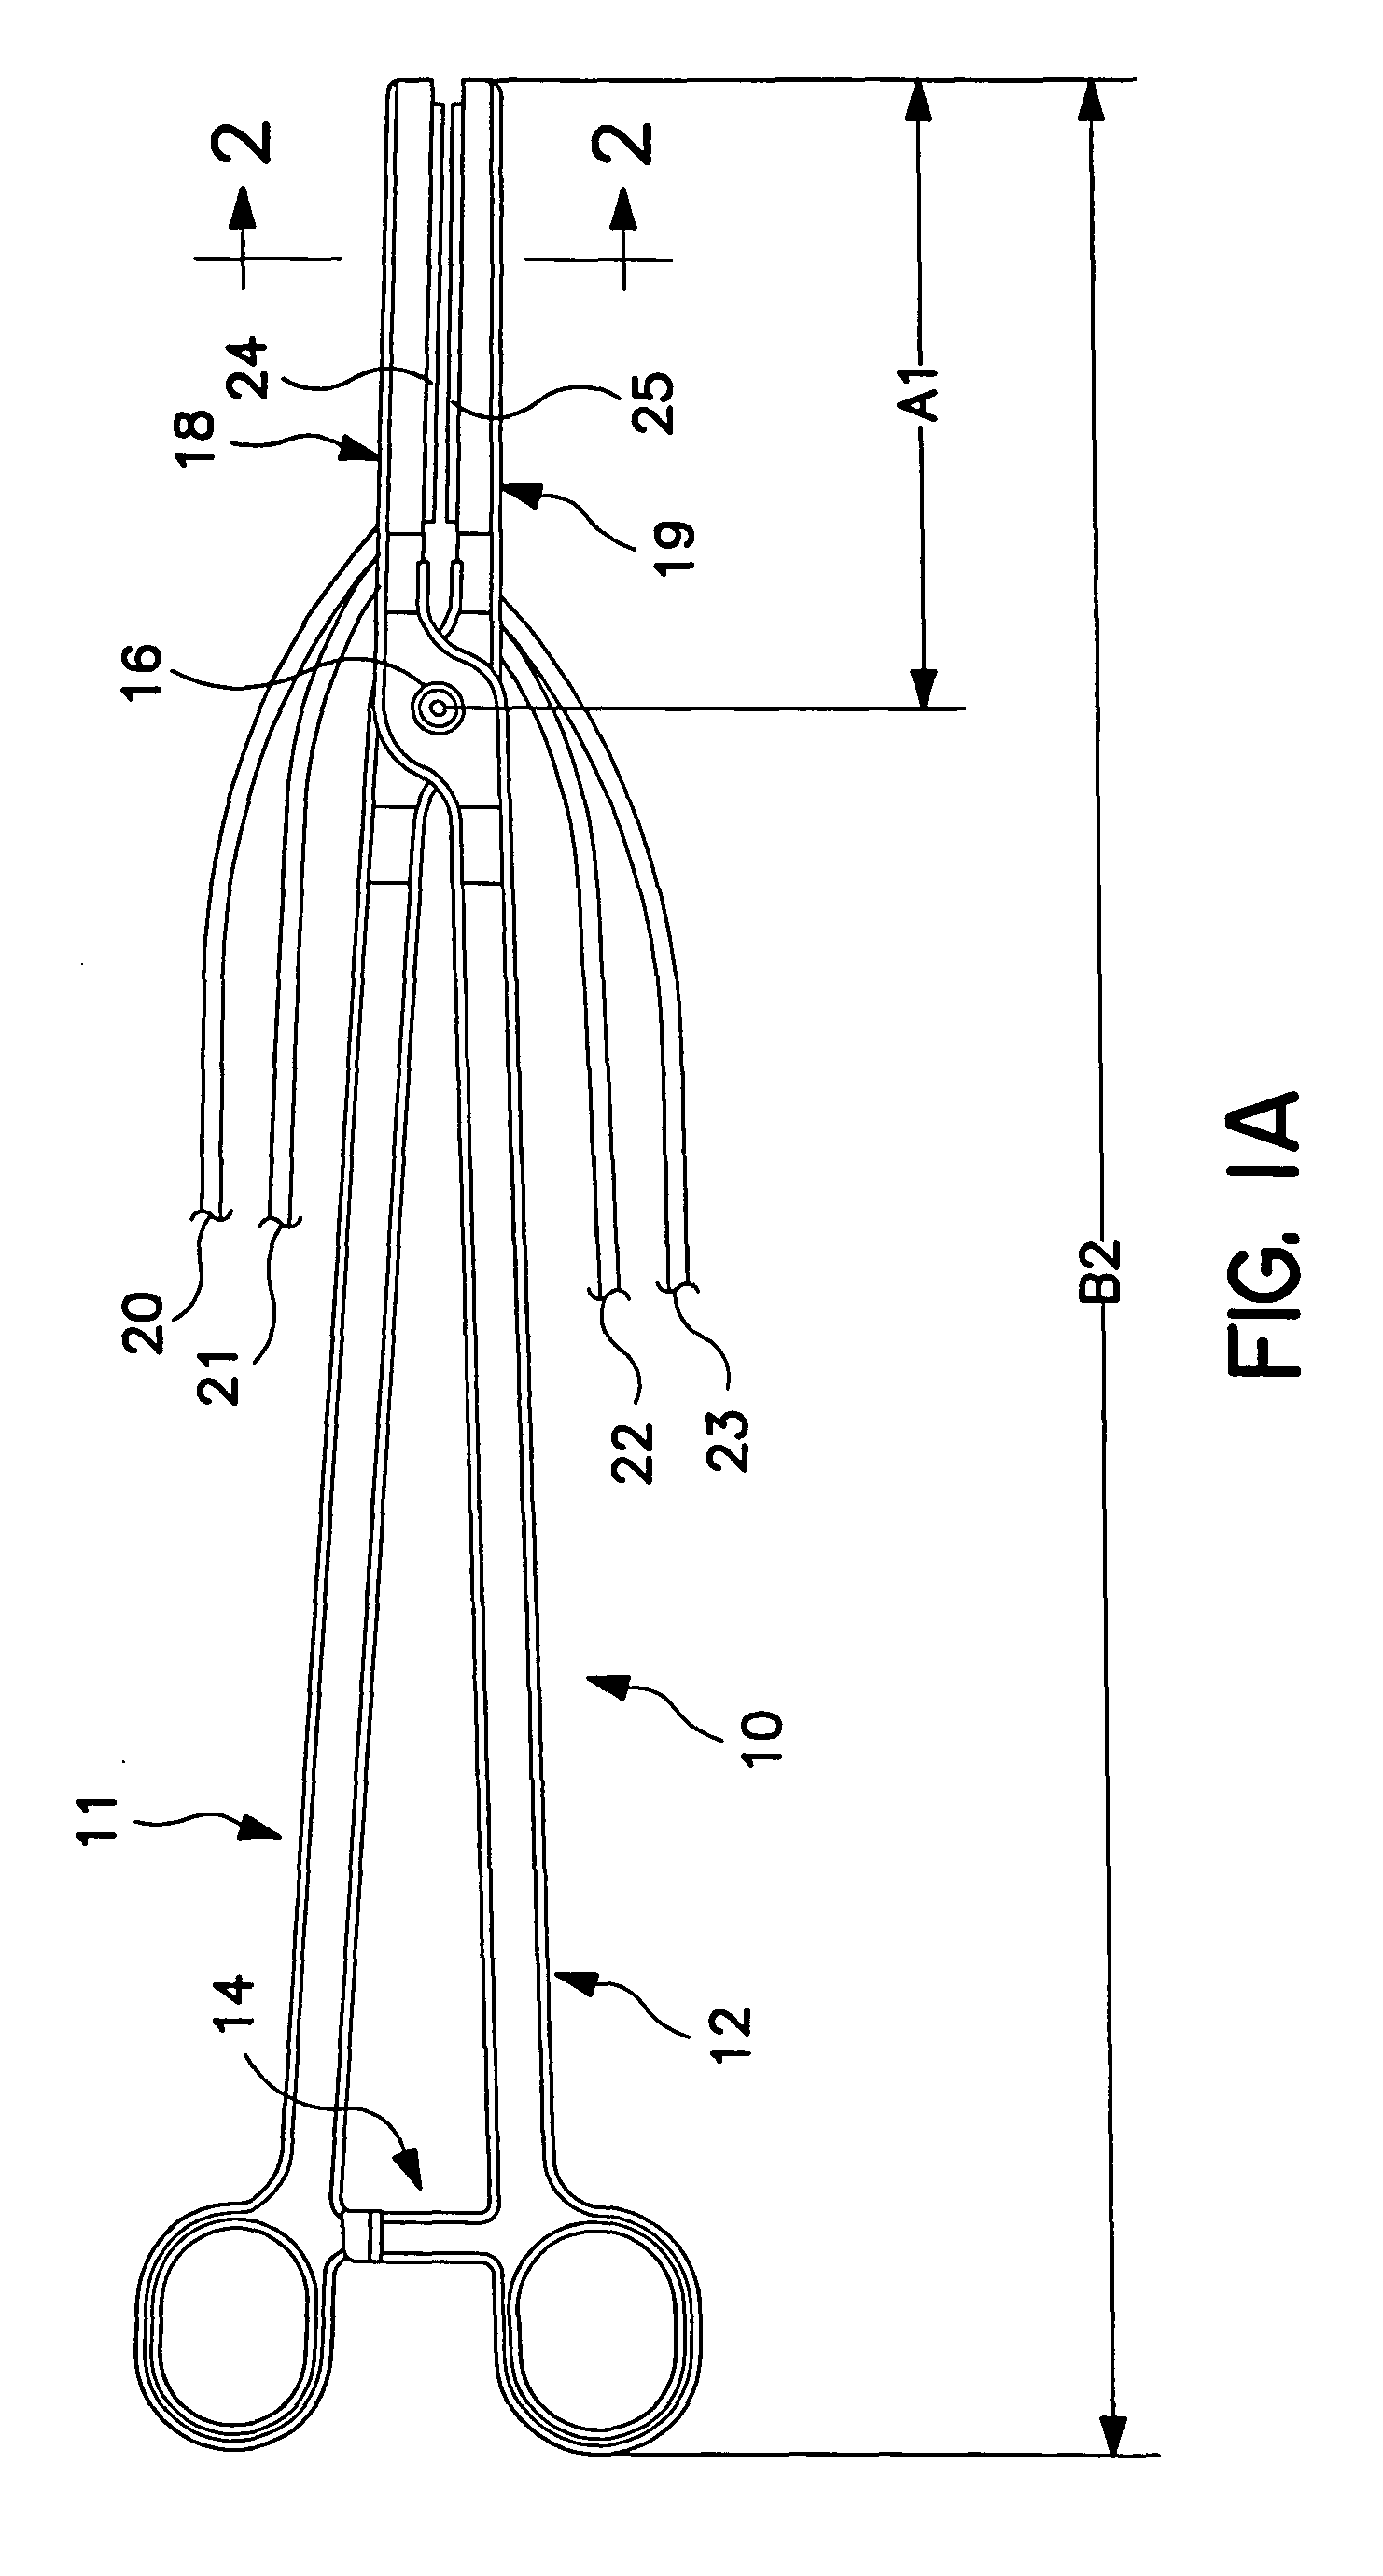 Method and system for treatment of atrial tachyarrhythmias